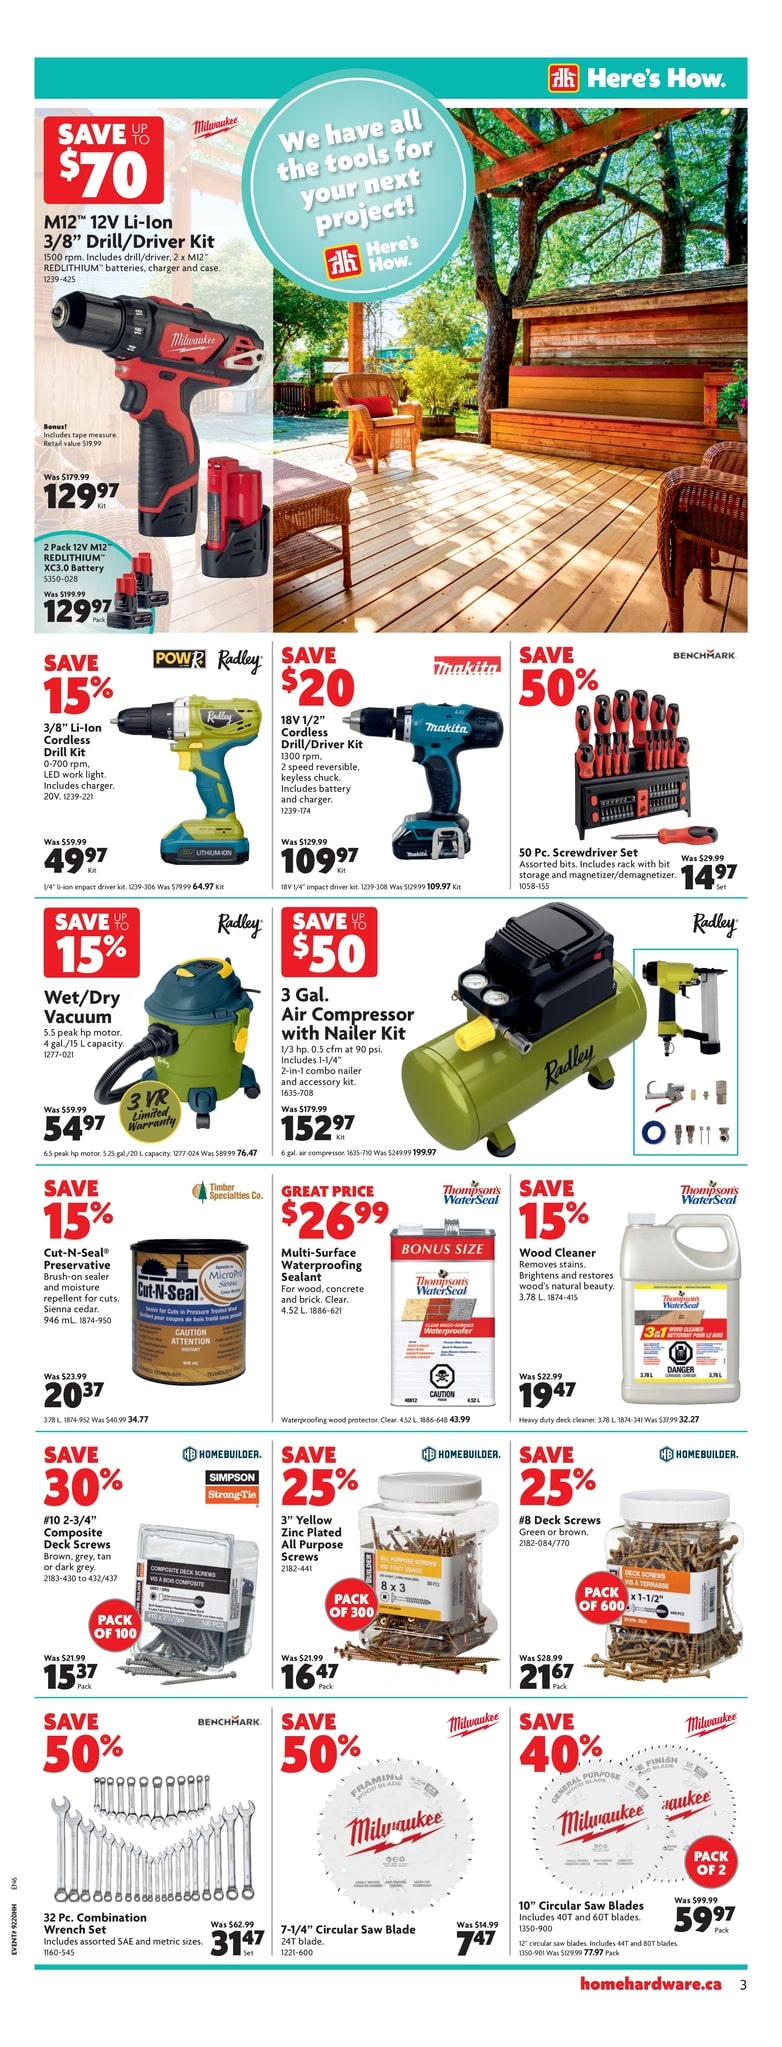 Home Hardware - Weekly Flyer Specials - Page 5